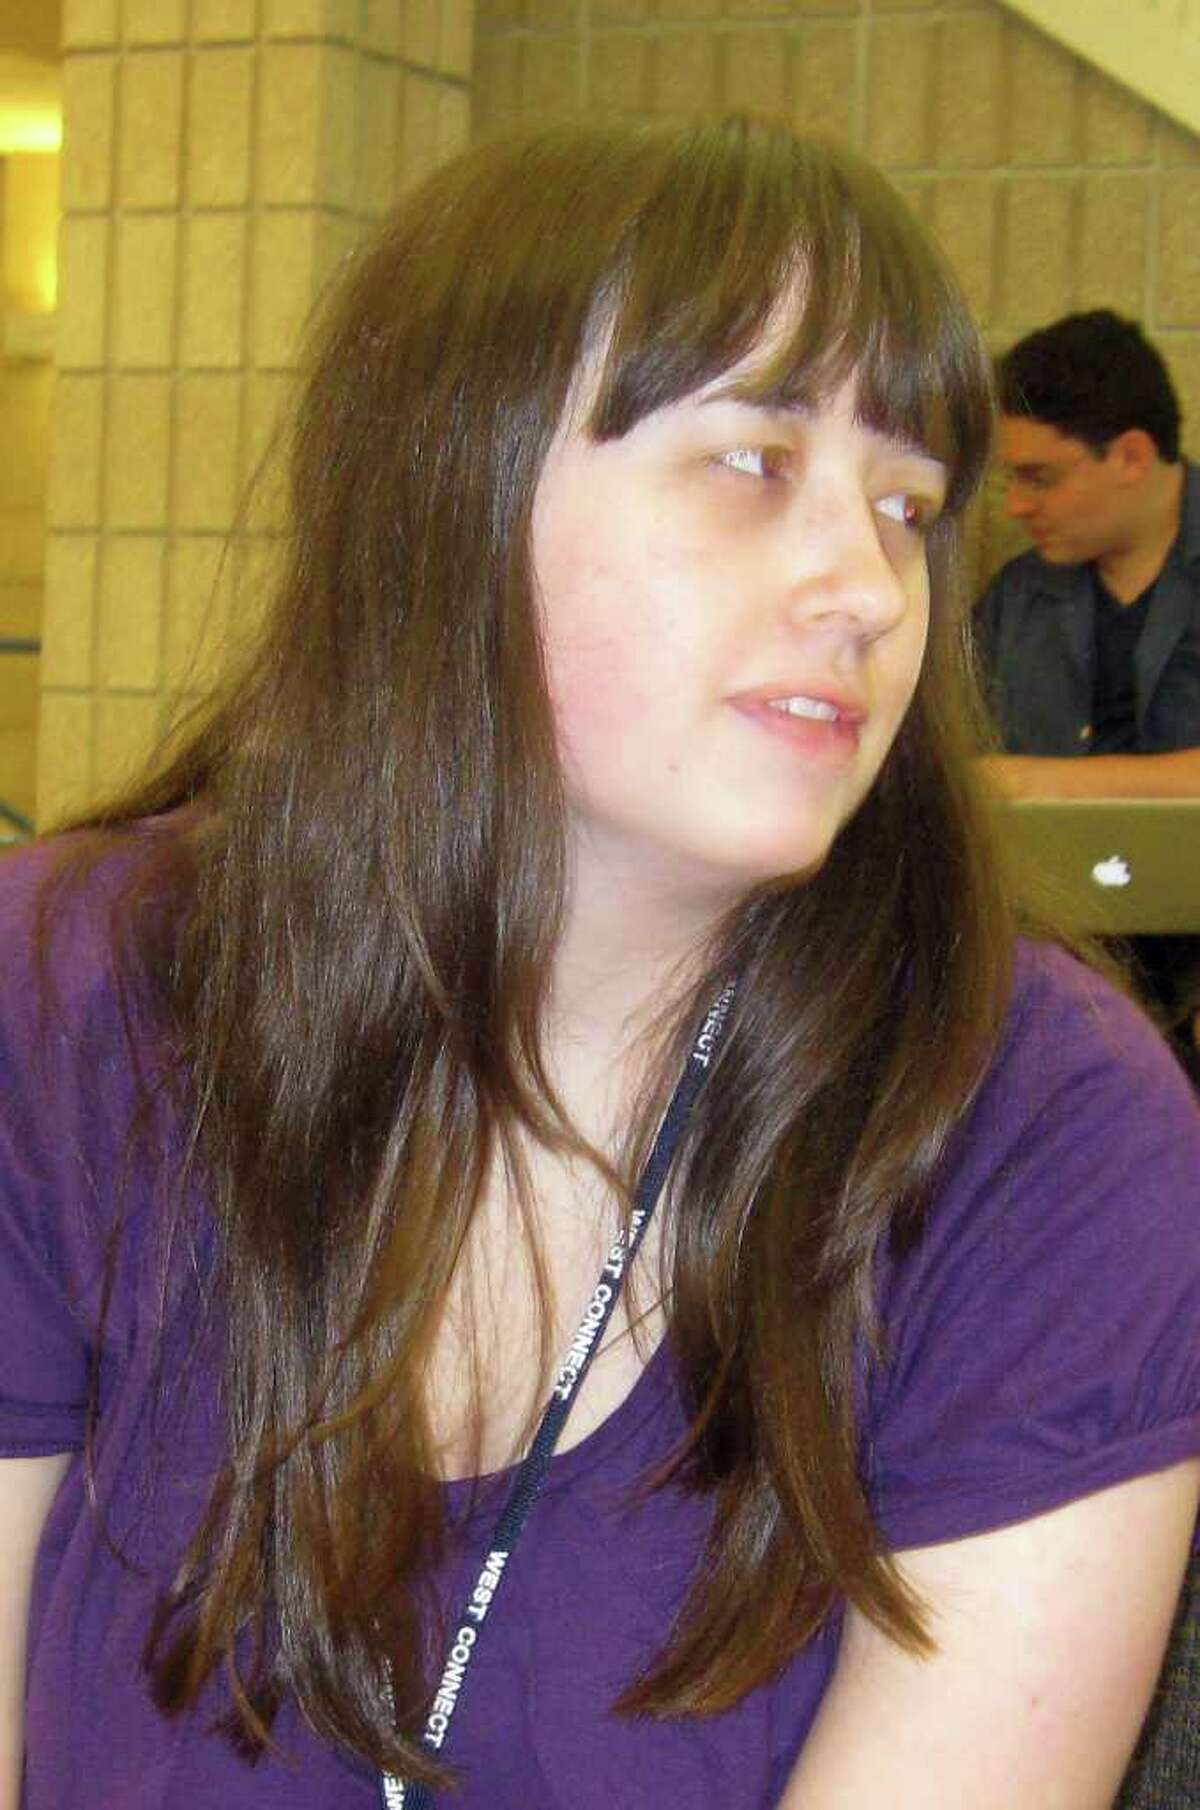 Christina Purcell, 18, a freshman at Western Connecticut University says she is too liberal to be a Democrat. Photo taken Friday, Sept. 3, 2010.